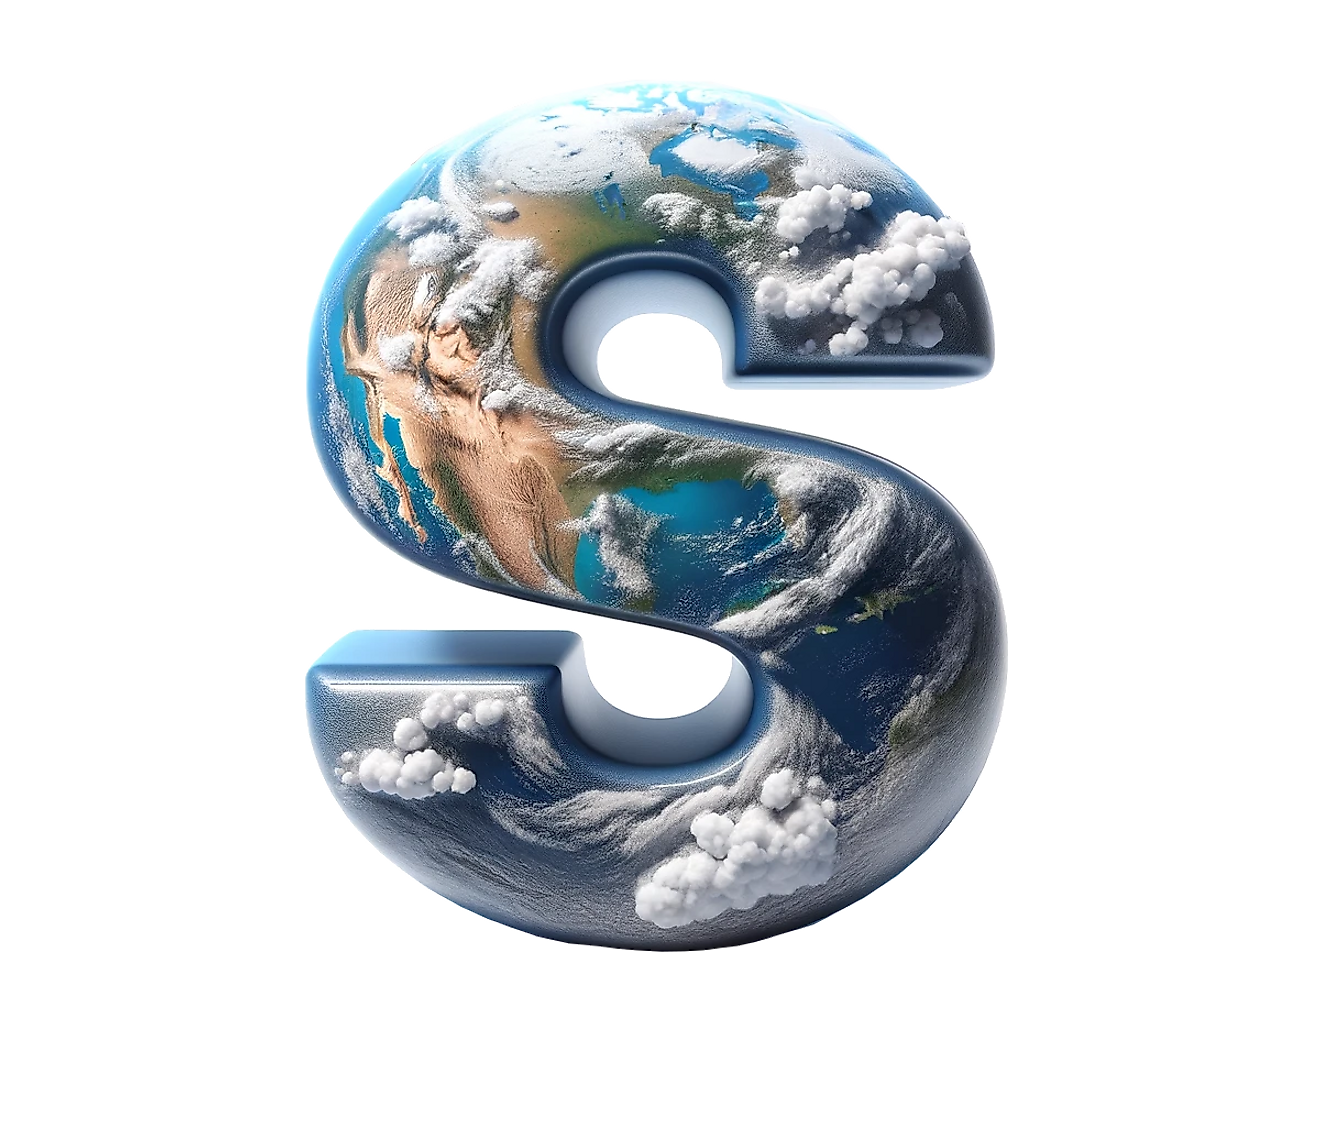 The Letter "S" decorated in the features of Planet Earth.